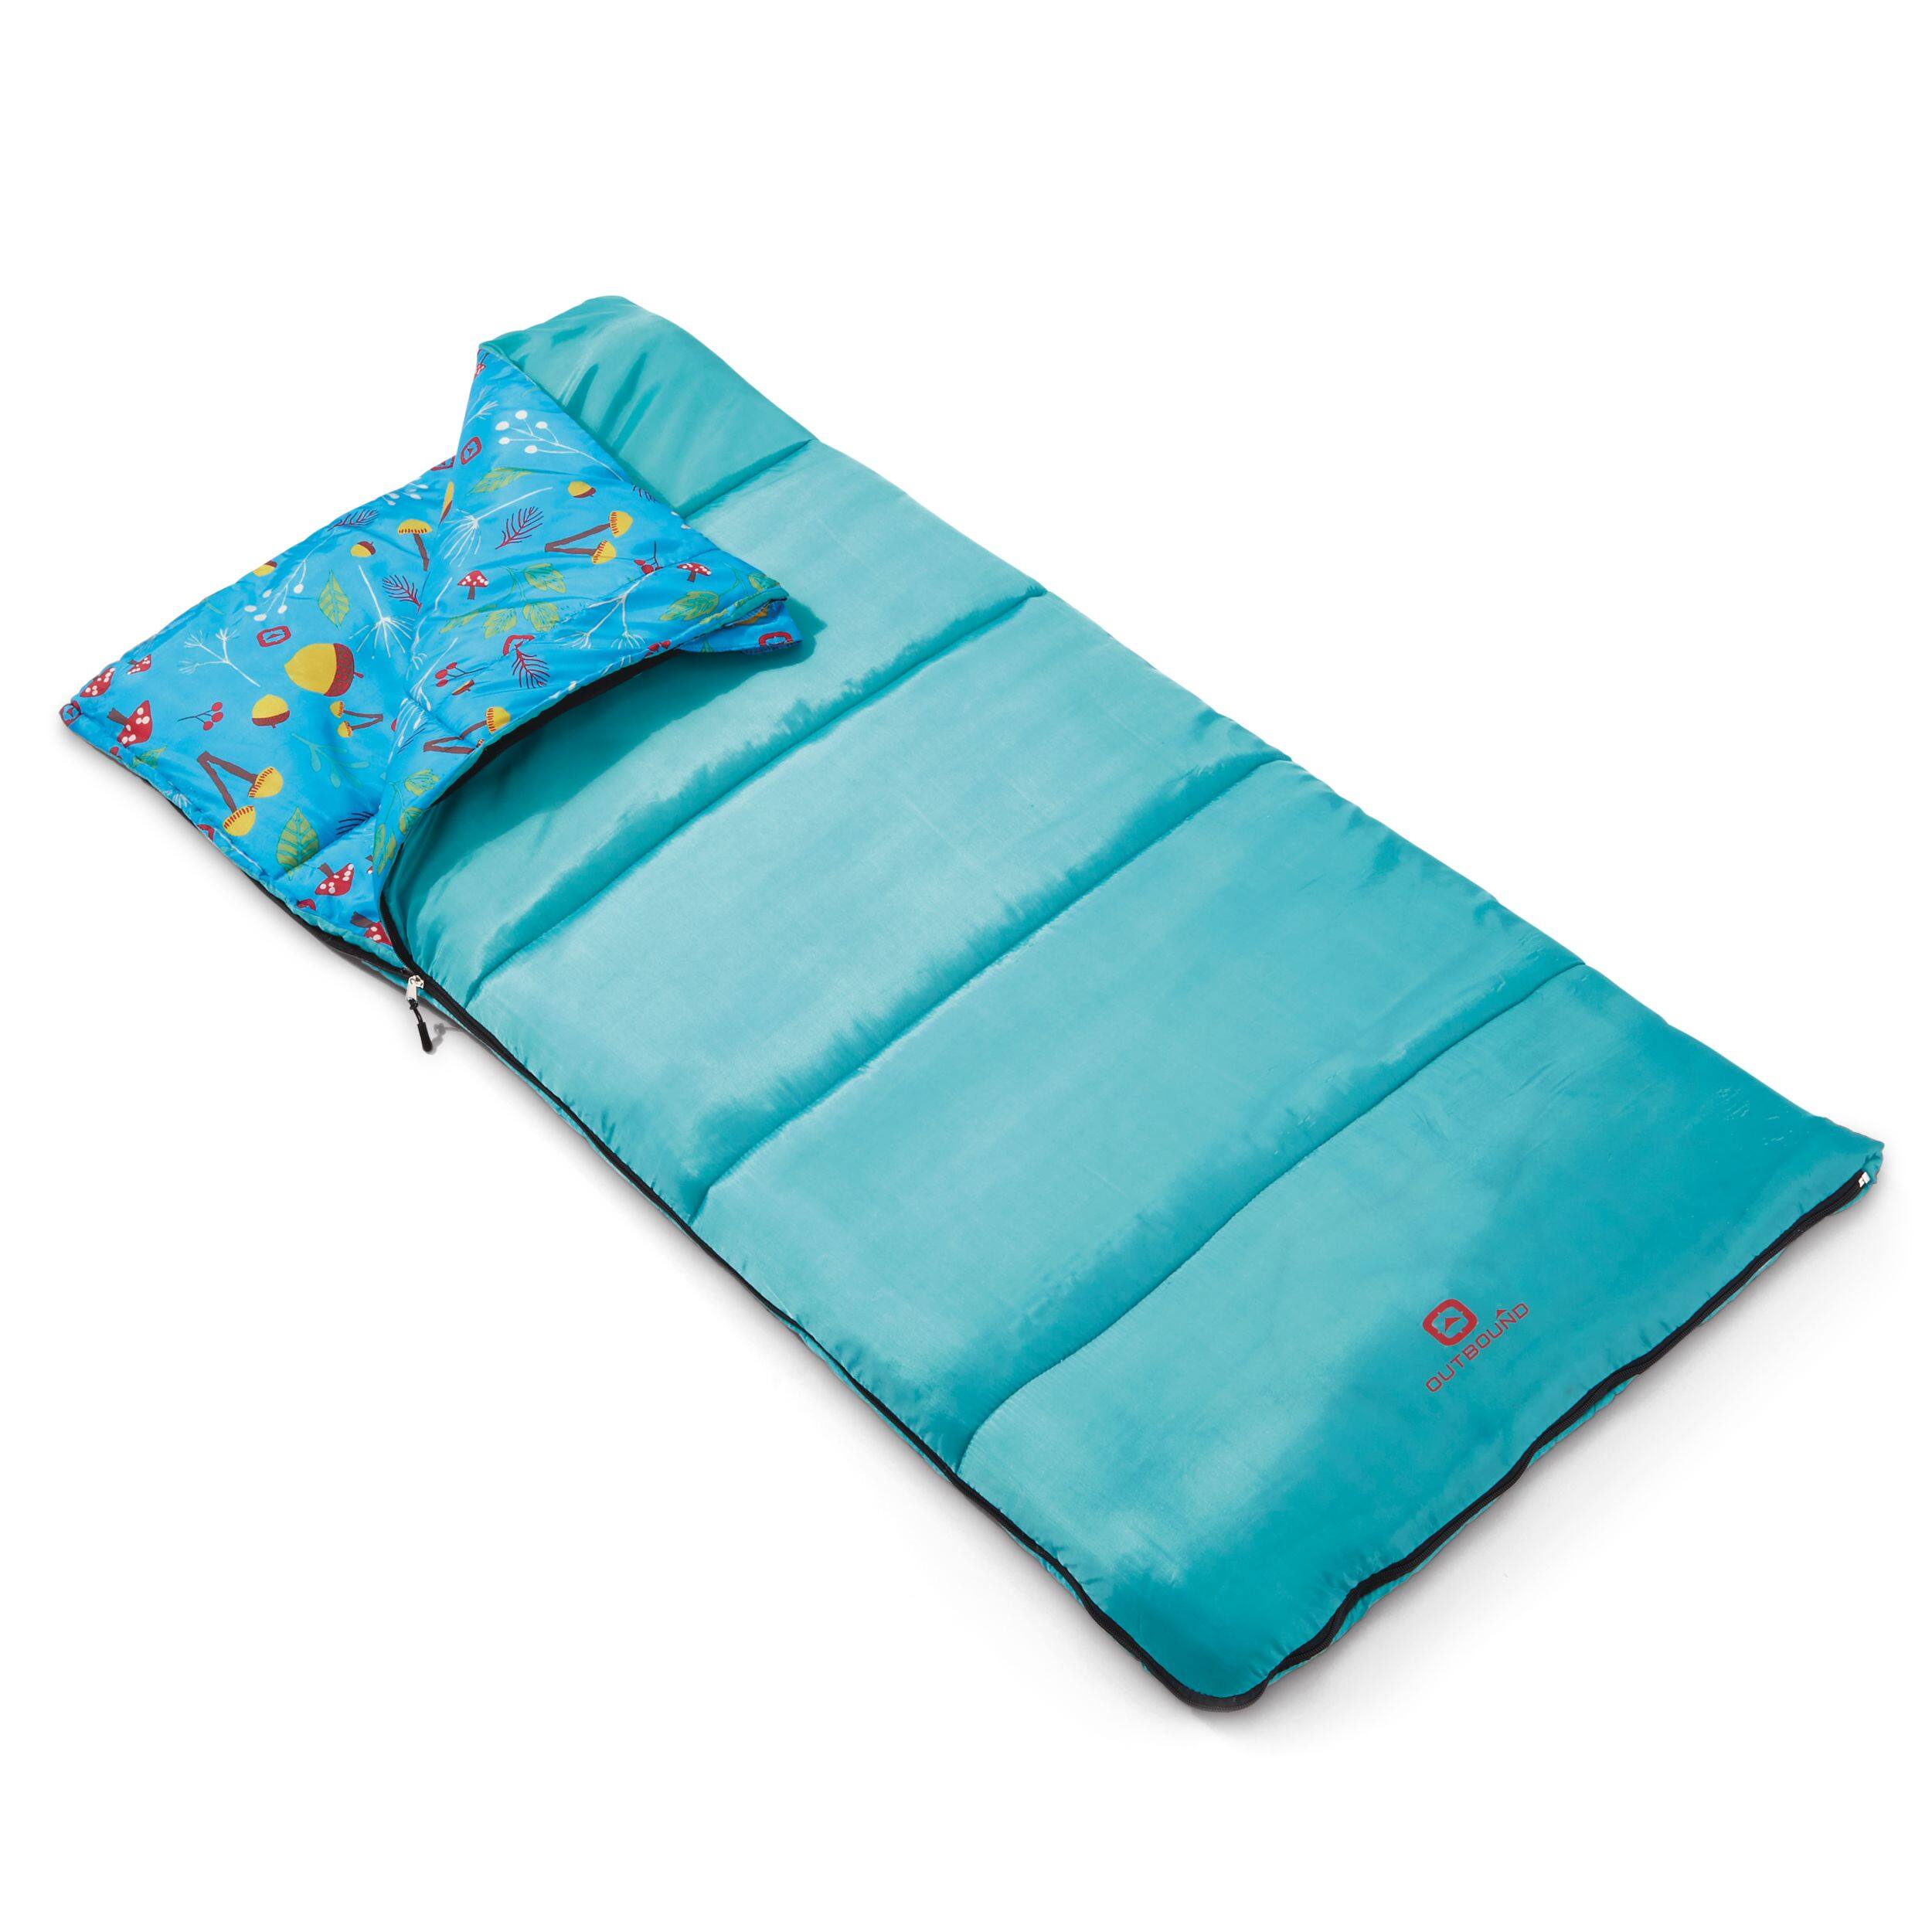 Outbound Lite Youth Sleeping Bag, 6°C | Canadian Tire